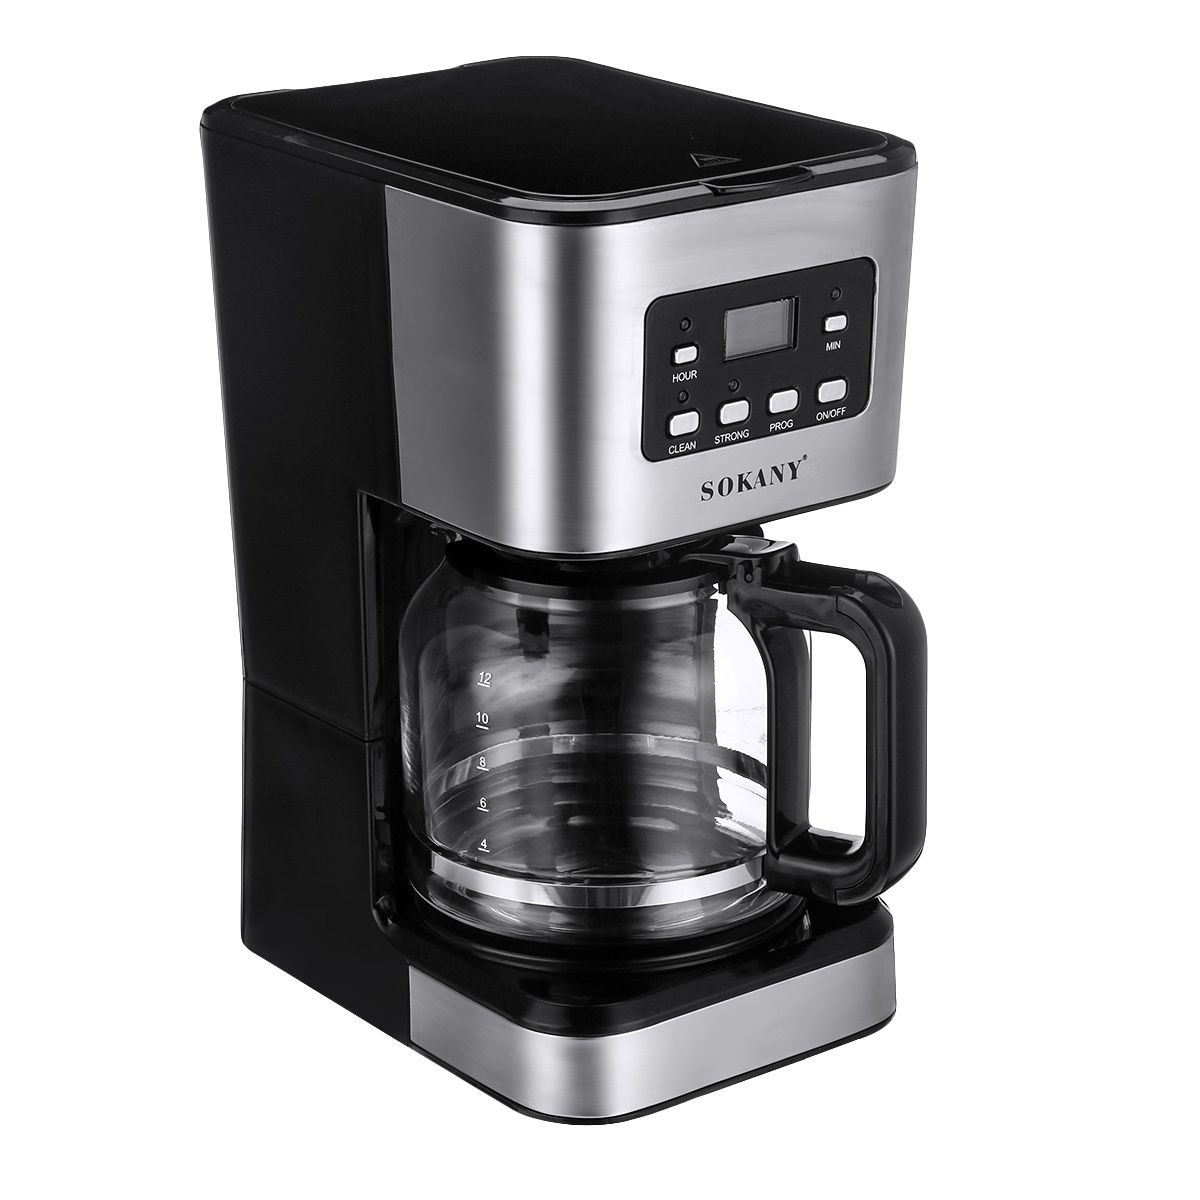 220V-Coffee-Maker-12-Cups-15L-Semi-Automatic-Espresso-Making-Machine-Stainless-Steel-1560948